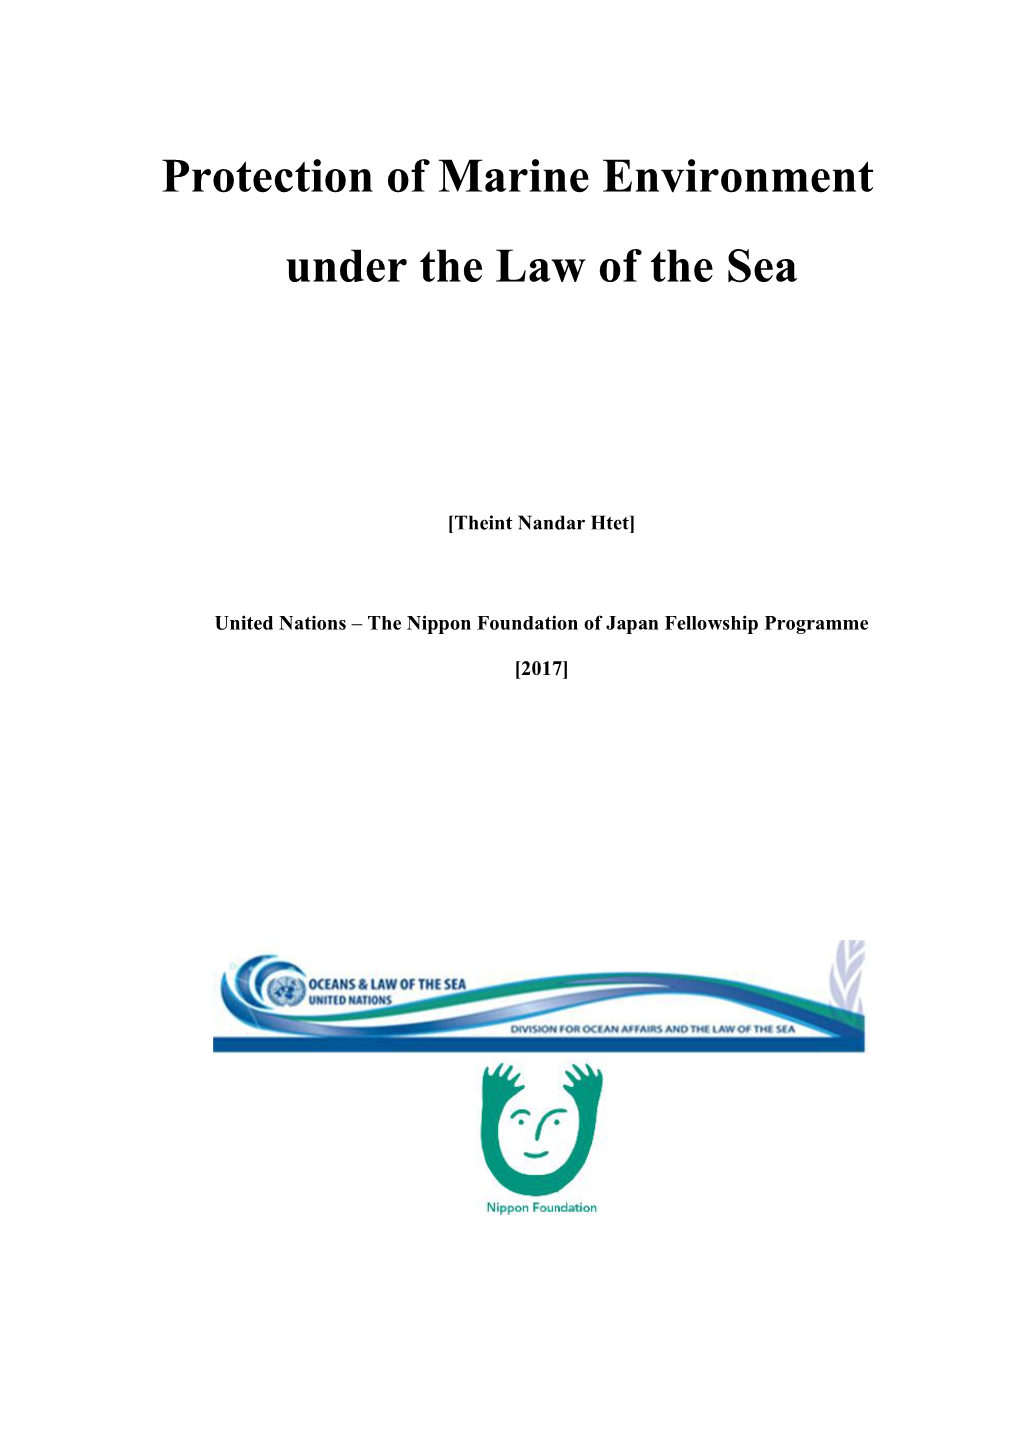 Protection of Marine Environment Under the Law of the Sea